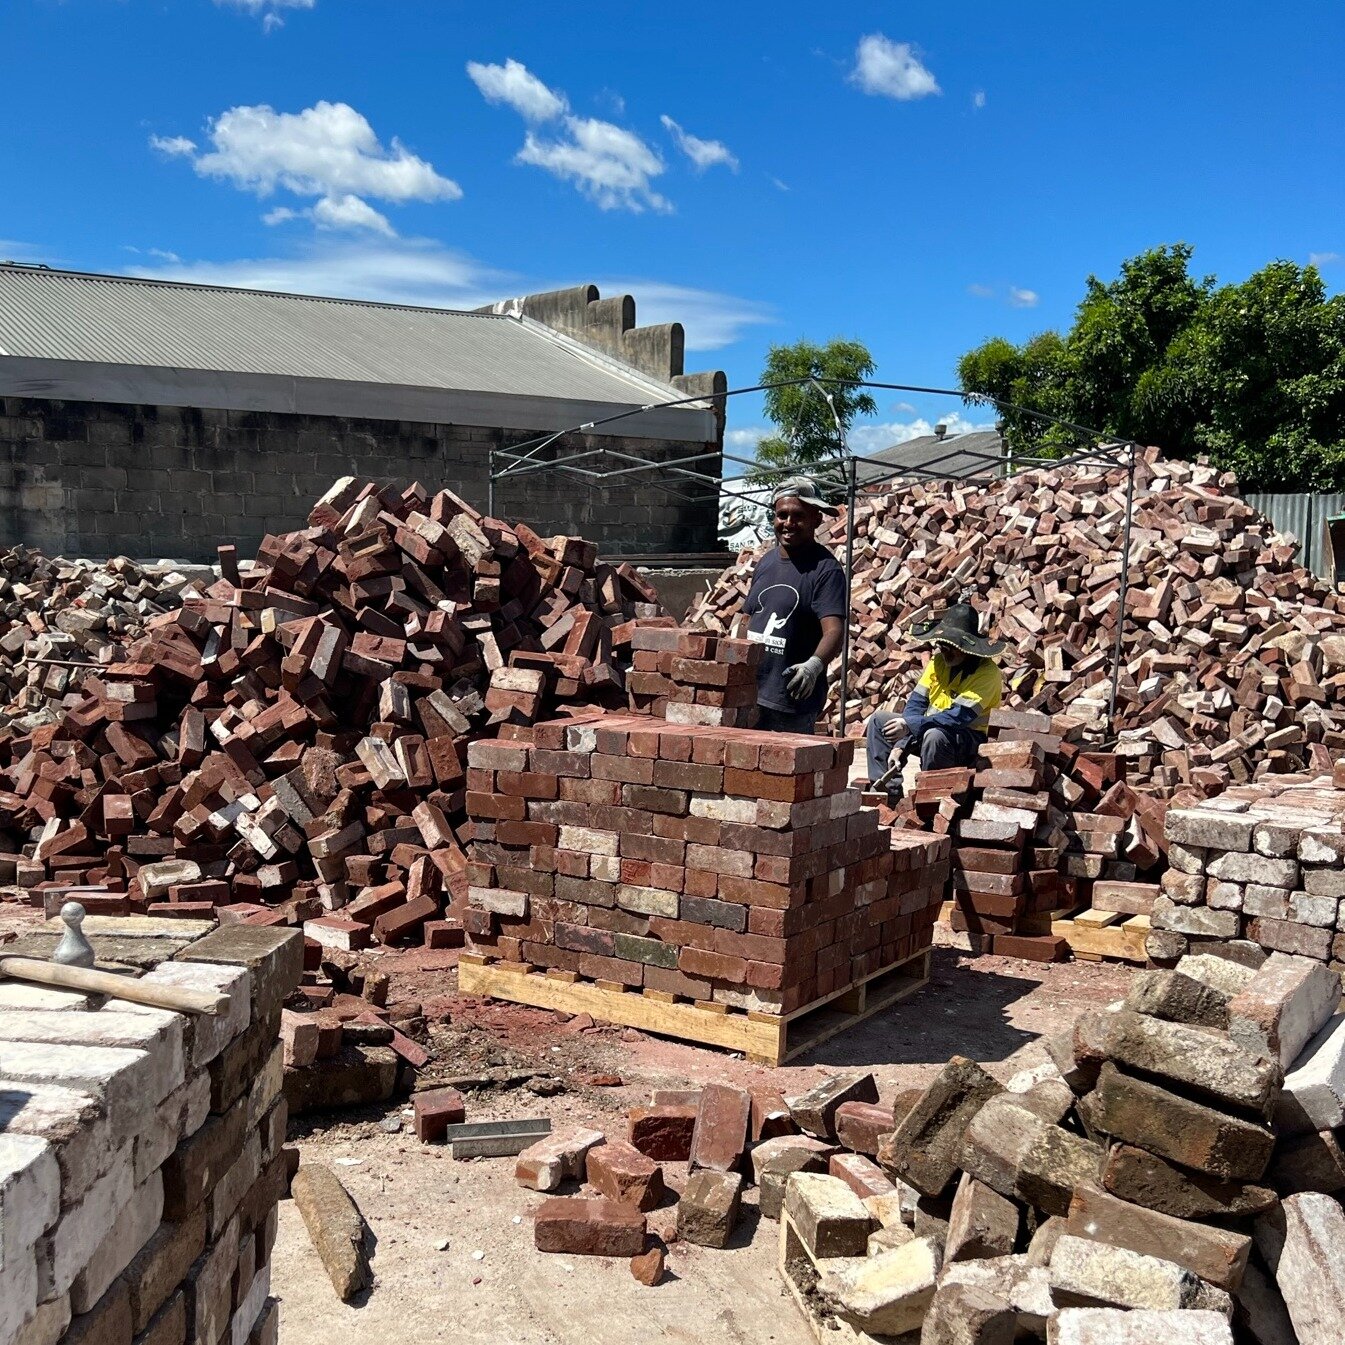 LOHAS Recycled Bricks are sourced from demolition sites that may include residential houses around Sydney suburbs like Homebush, Marrickville and other inner west suburbs.

LOHAS Recycled bricks production starts with grading the brick, filtering and